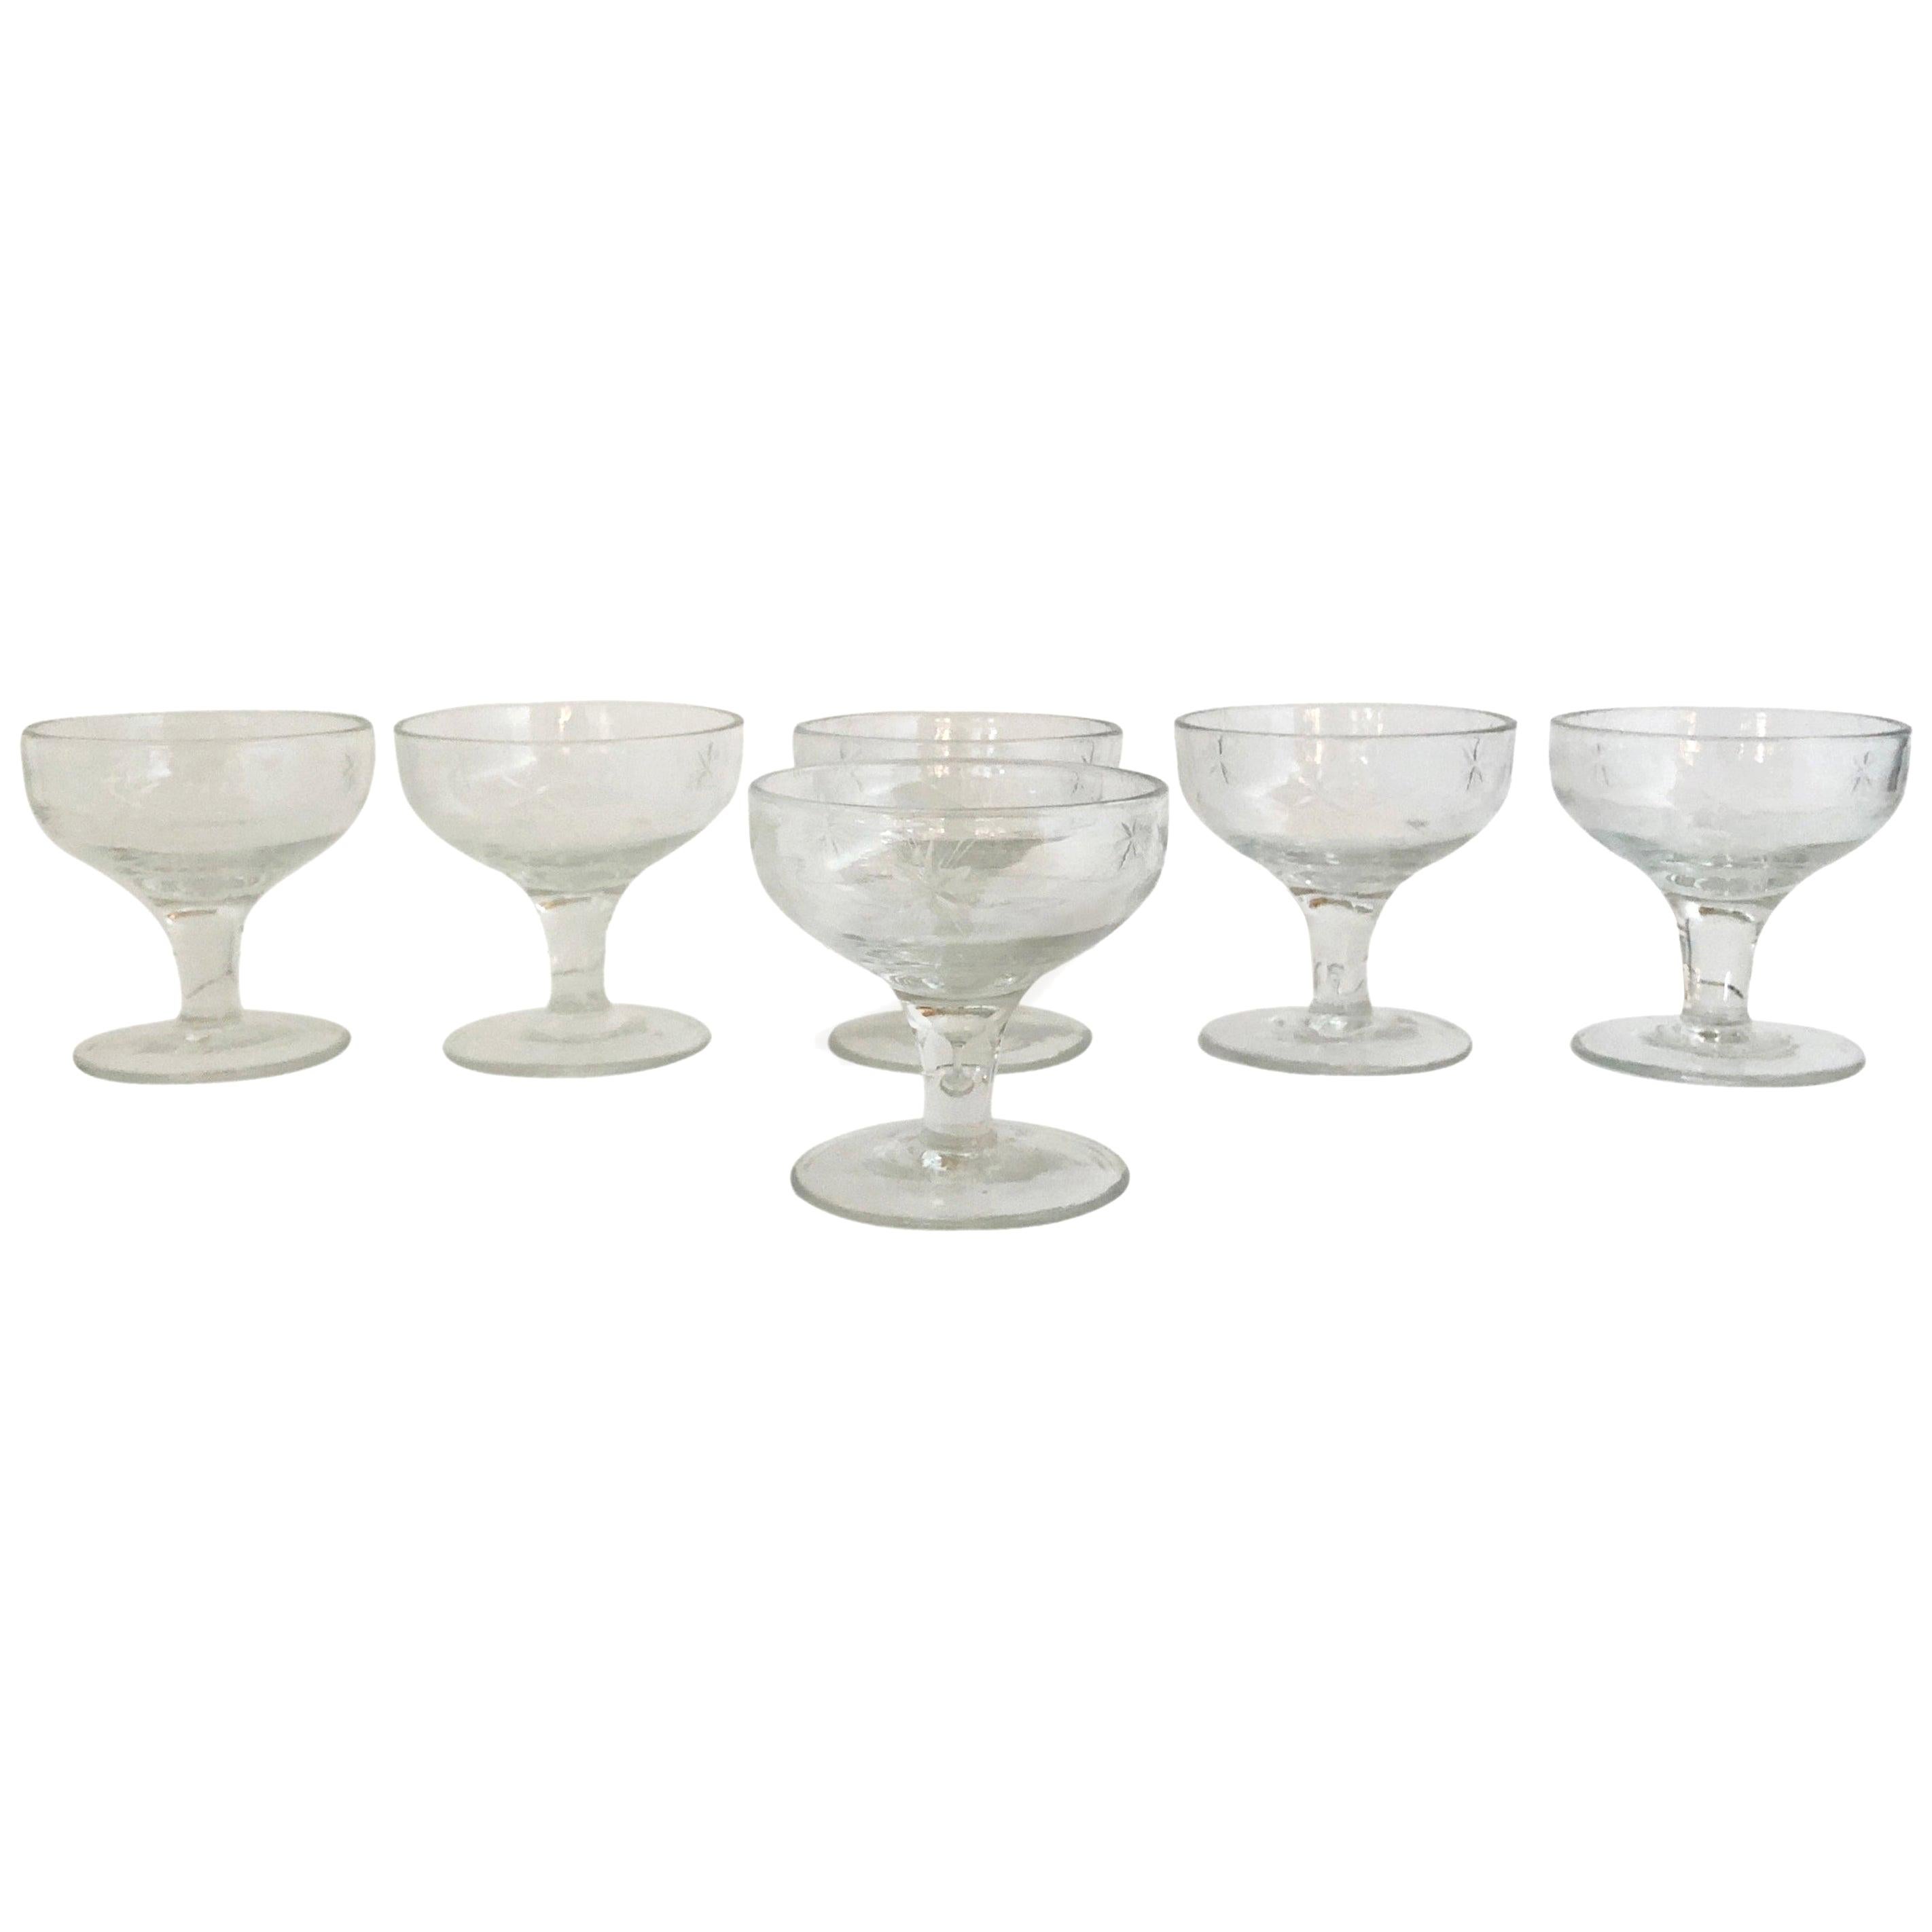 Set of 6 Starburst Etched Glass Champagne Coupe Glasses For Sale